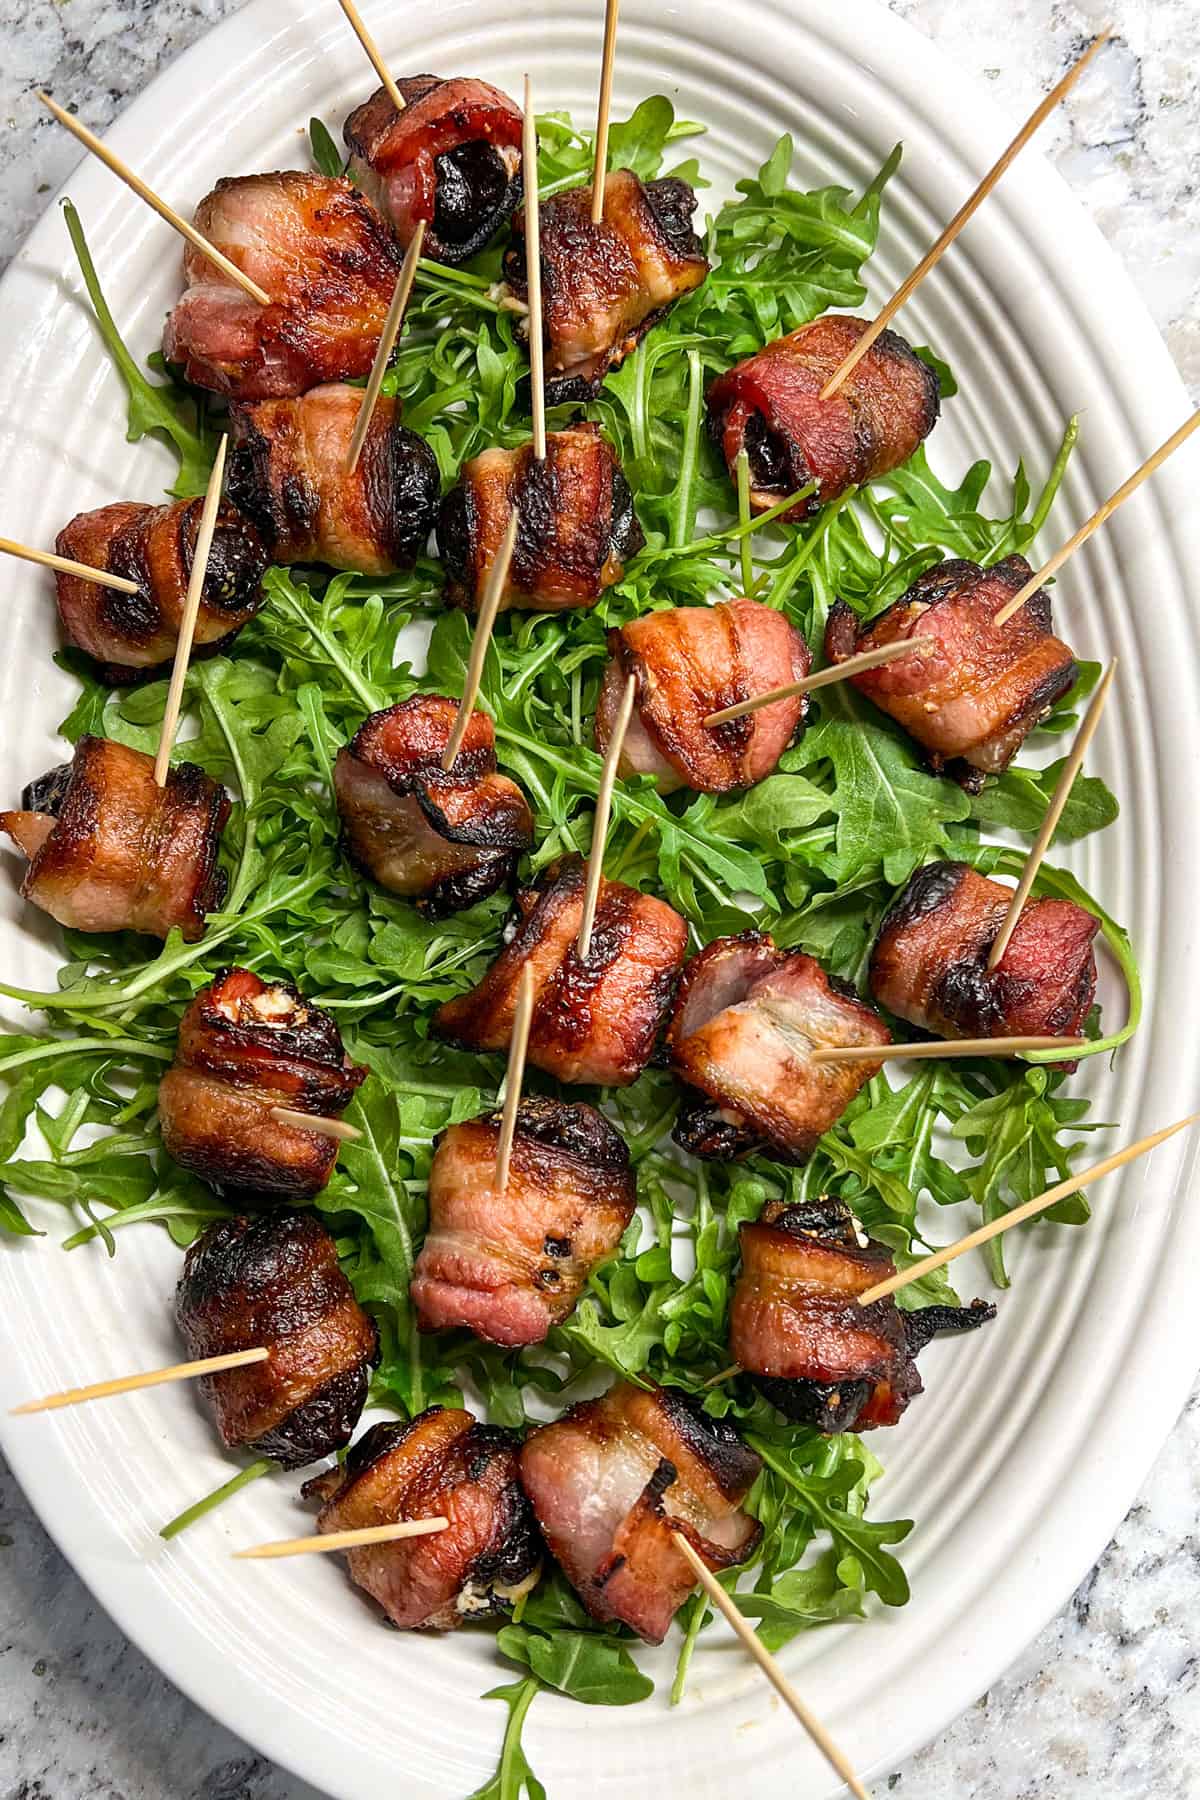 oval platter with about two dozen crispy bacon wrapped prunes on a bed of arugula, with toothpicks stuck into the bacon.